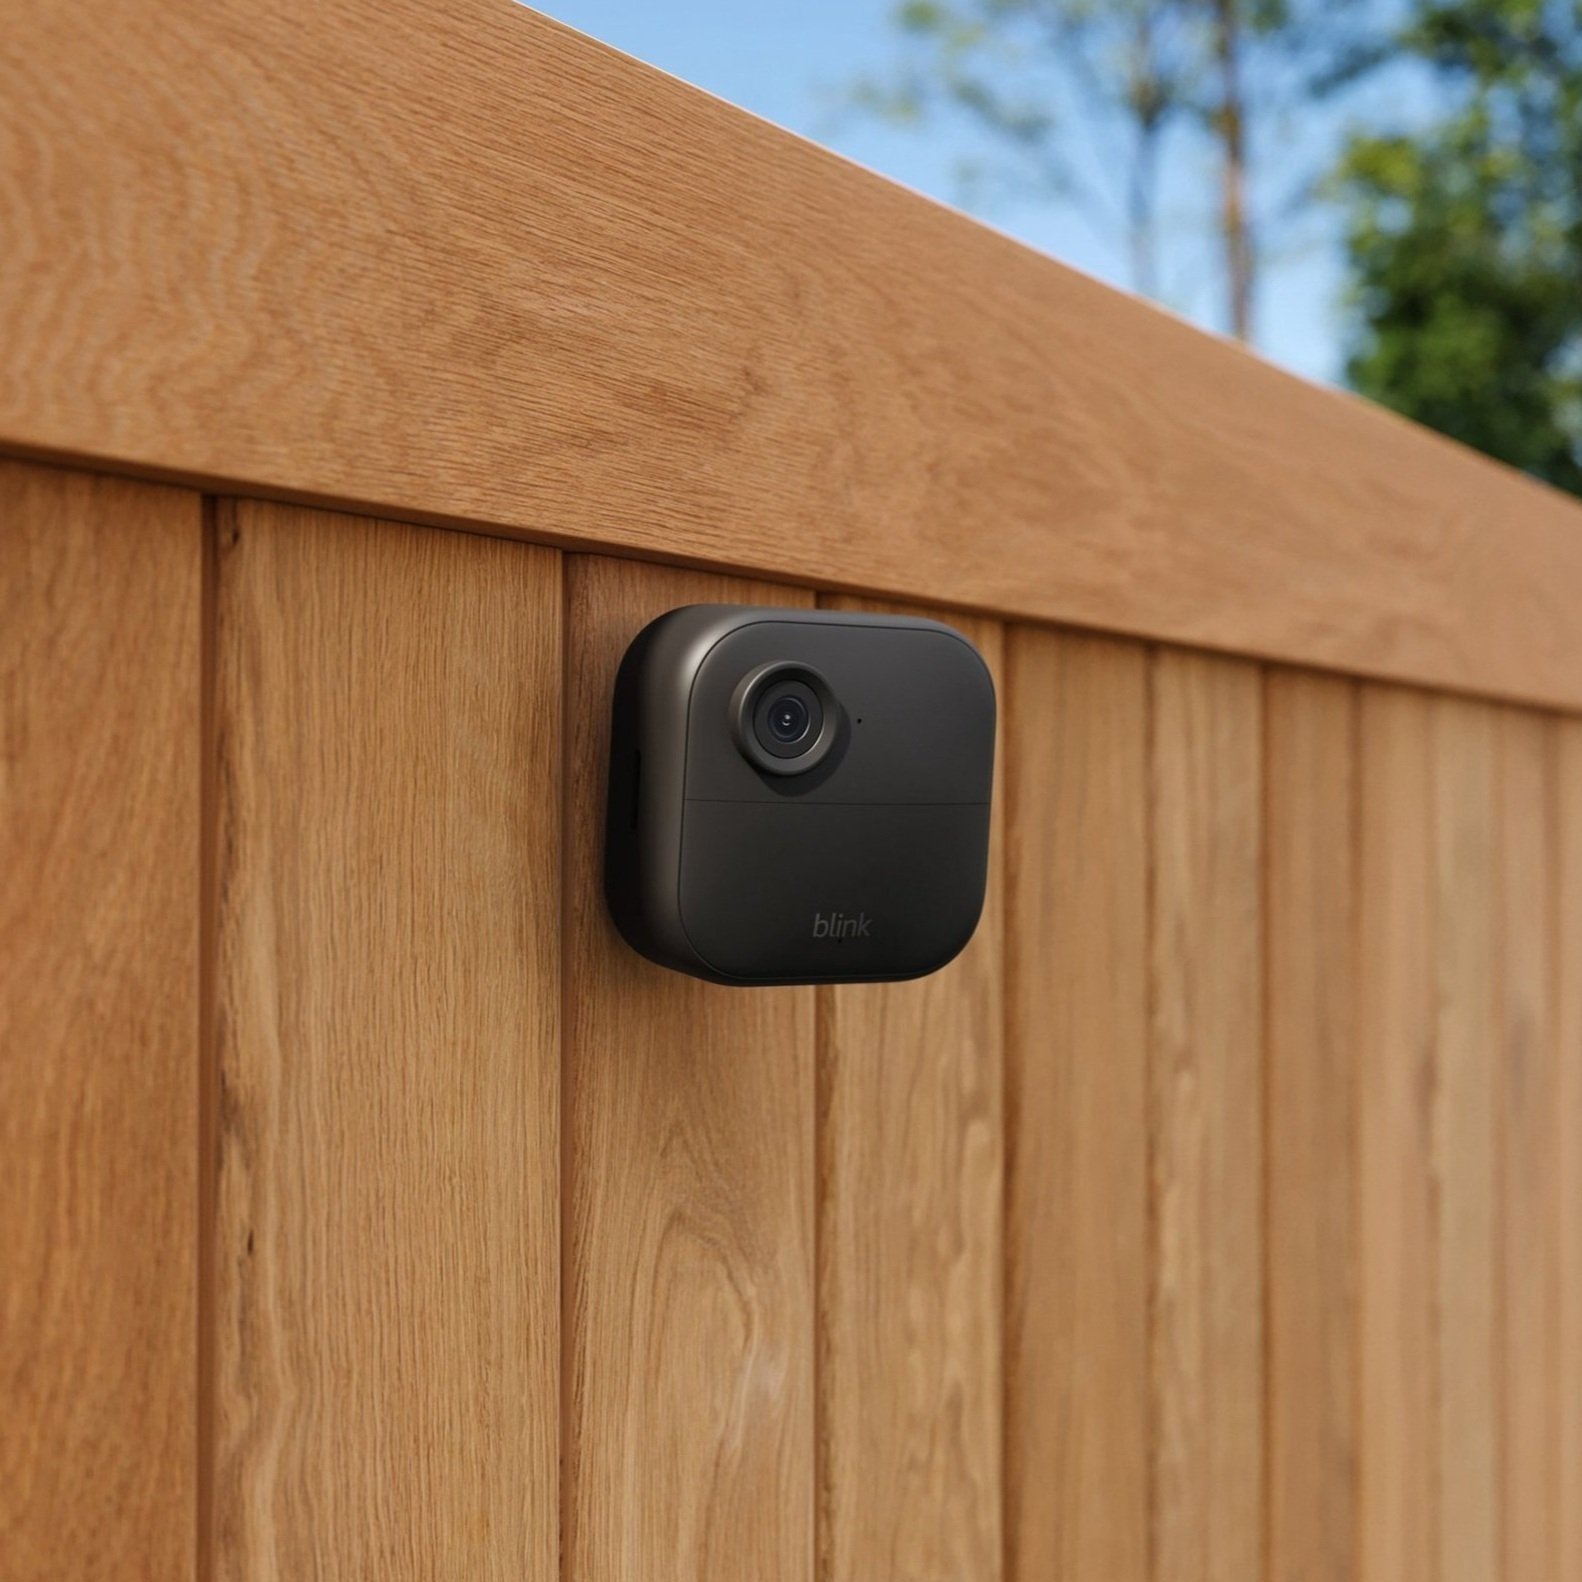 The new Blink Indoor and Outdoor wireless cameras have 2-year